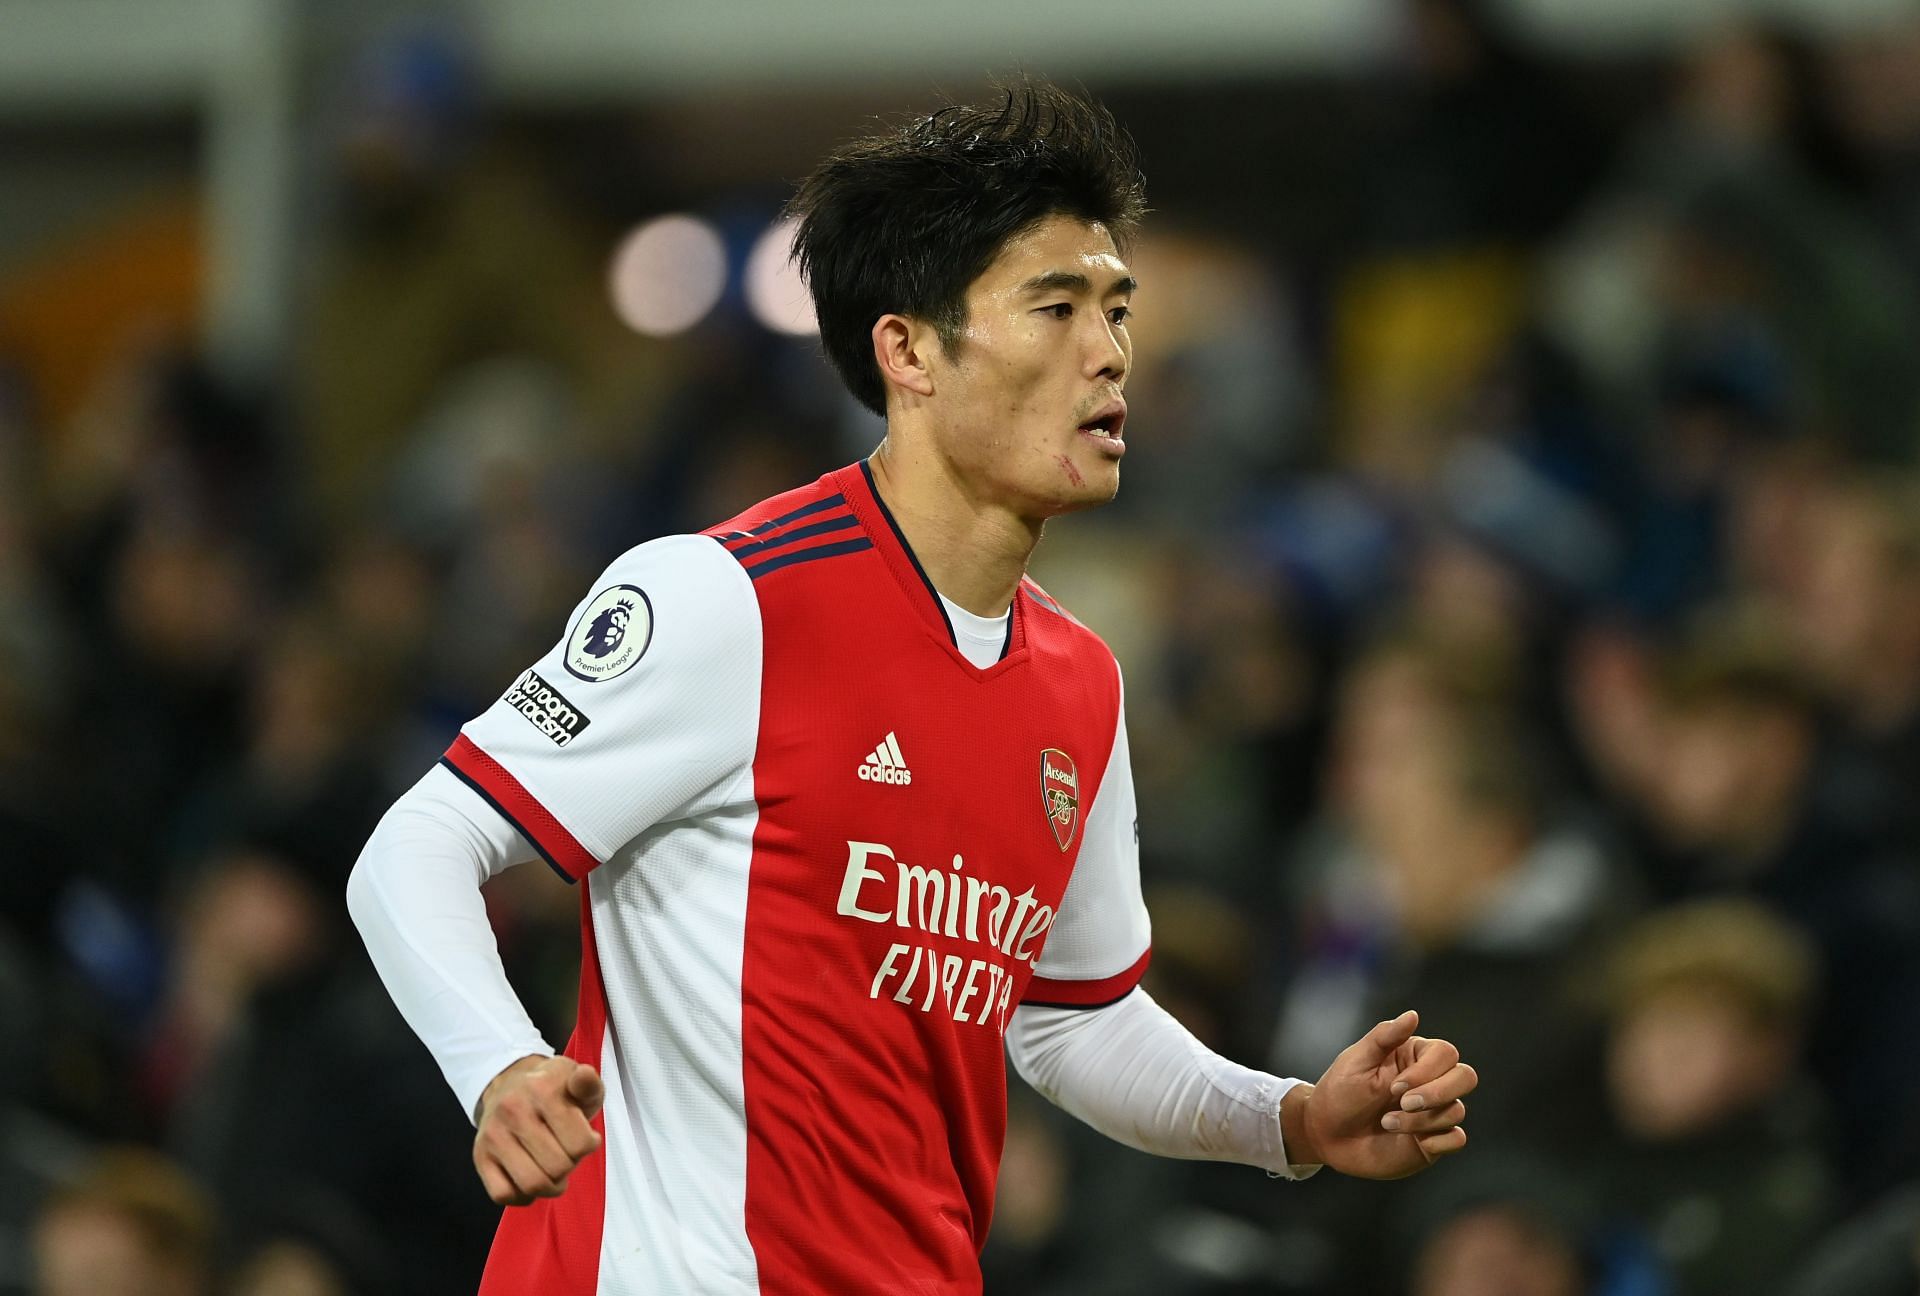 The Japanese joined Arsenal from Bologna last summer, and has impressed.